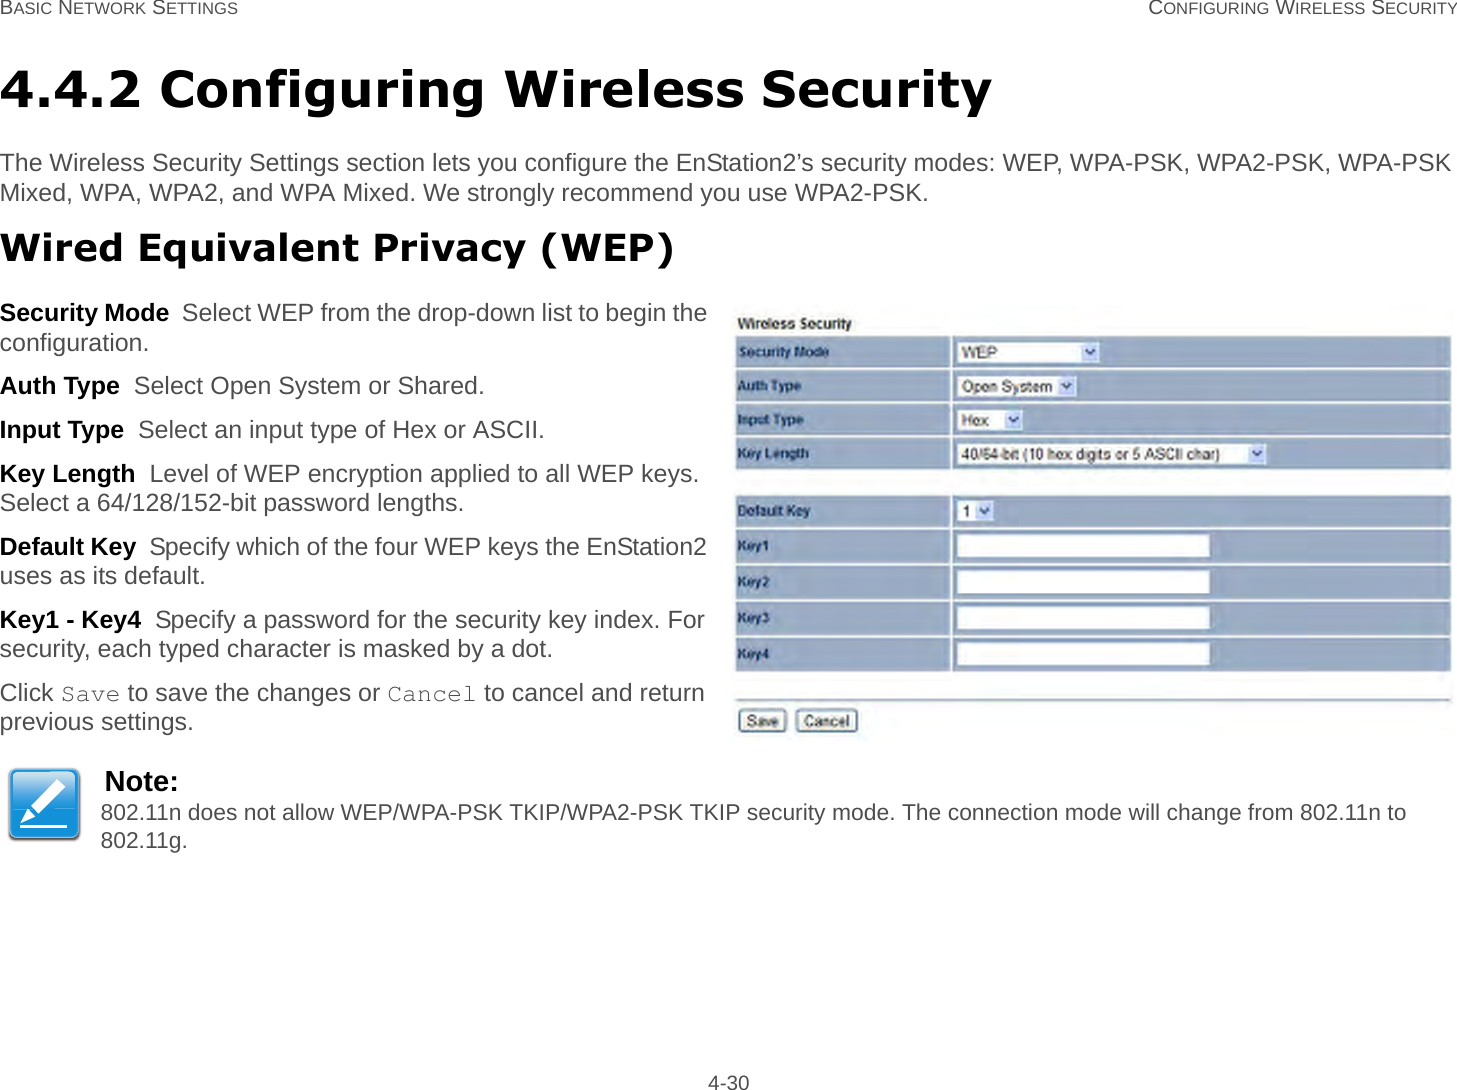 BASIC NETWORK SETTINGS CONFIGURING WIRELESS SECURITY 4-304.4.2 Configuring Wireless SecurityThe Wireless Security Settings section lets you configure the EnStation2’s security modes: WEP, WPA-PSK, WPA2-PSK, WPA-PSK Mixed, WPA, WPA2, and WPA Mixed. We strongly recommend you use WPA2-PSK.Wired Equivalent Privacy (WEP)Security Mode  Select WEP from the drop-down list to begin the configuration.Auth Type  Select Open System or Shared.Input Type  Select an input type of Hex or ASCII.Key Length  Level of WEP encryption applied to all WEP keys. Select a 64/128/152-bit password lengths.Default Key  Specify which of the four WEP keys the EnStation2 uses as its default.Key1 - Key4  Specify a password for the security key index. For security, each typed character is masked by a dot.Click Save to save the changes or Cancel to cancel and return previous settings.Note:802.11n does not allow WEP/WPA-PSK TKIP/WPA2-PSK TKIP security mode. The connection mode will change from 802.11n to 802.11g.